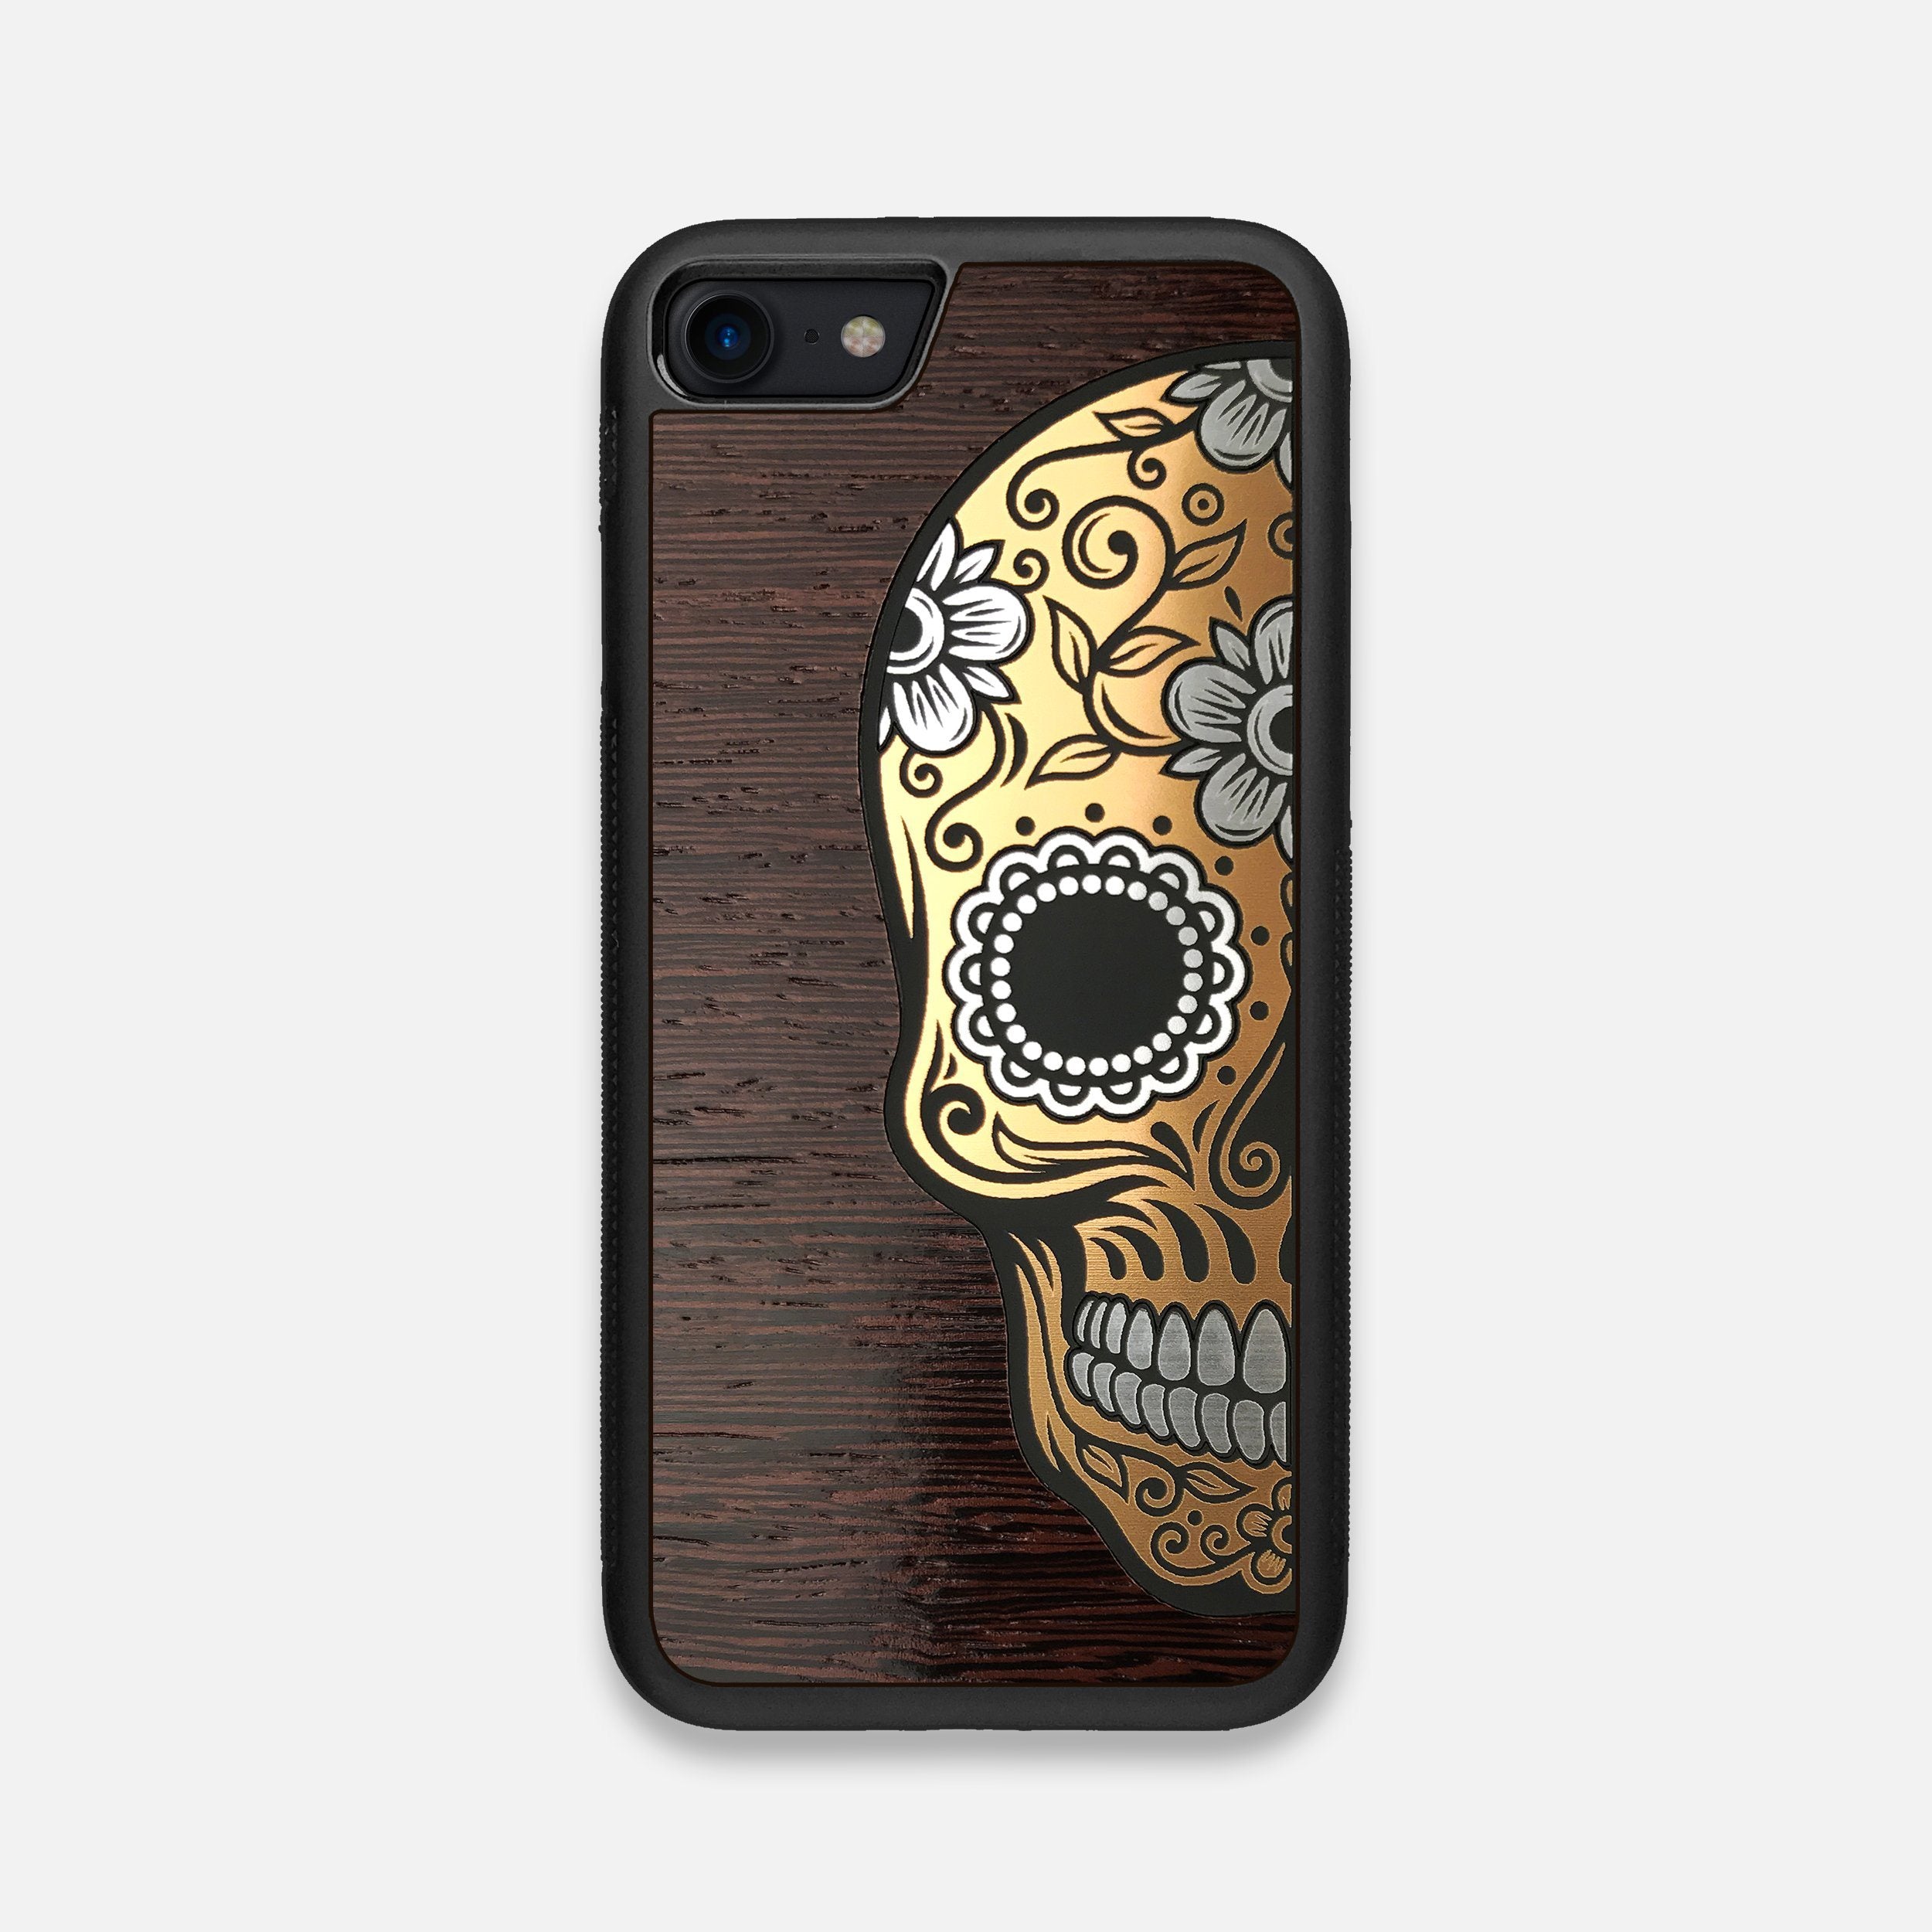 Front view of the Calavera Wood Sugar Skull Wood iPhone 7/8 Case by Keyway Designs